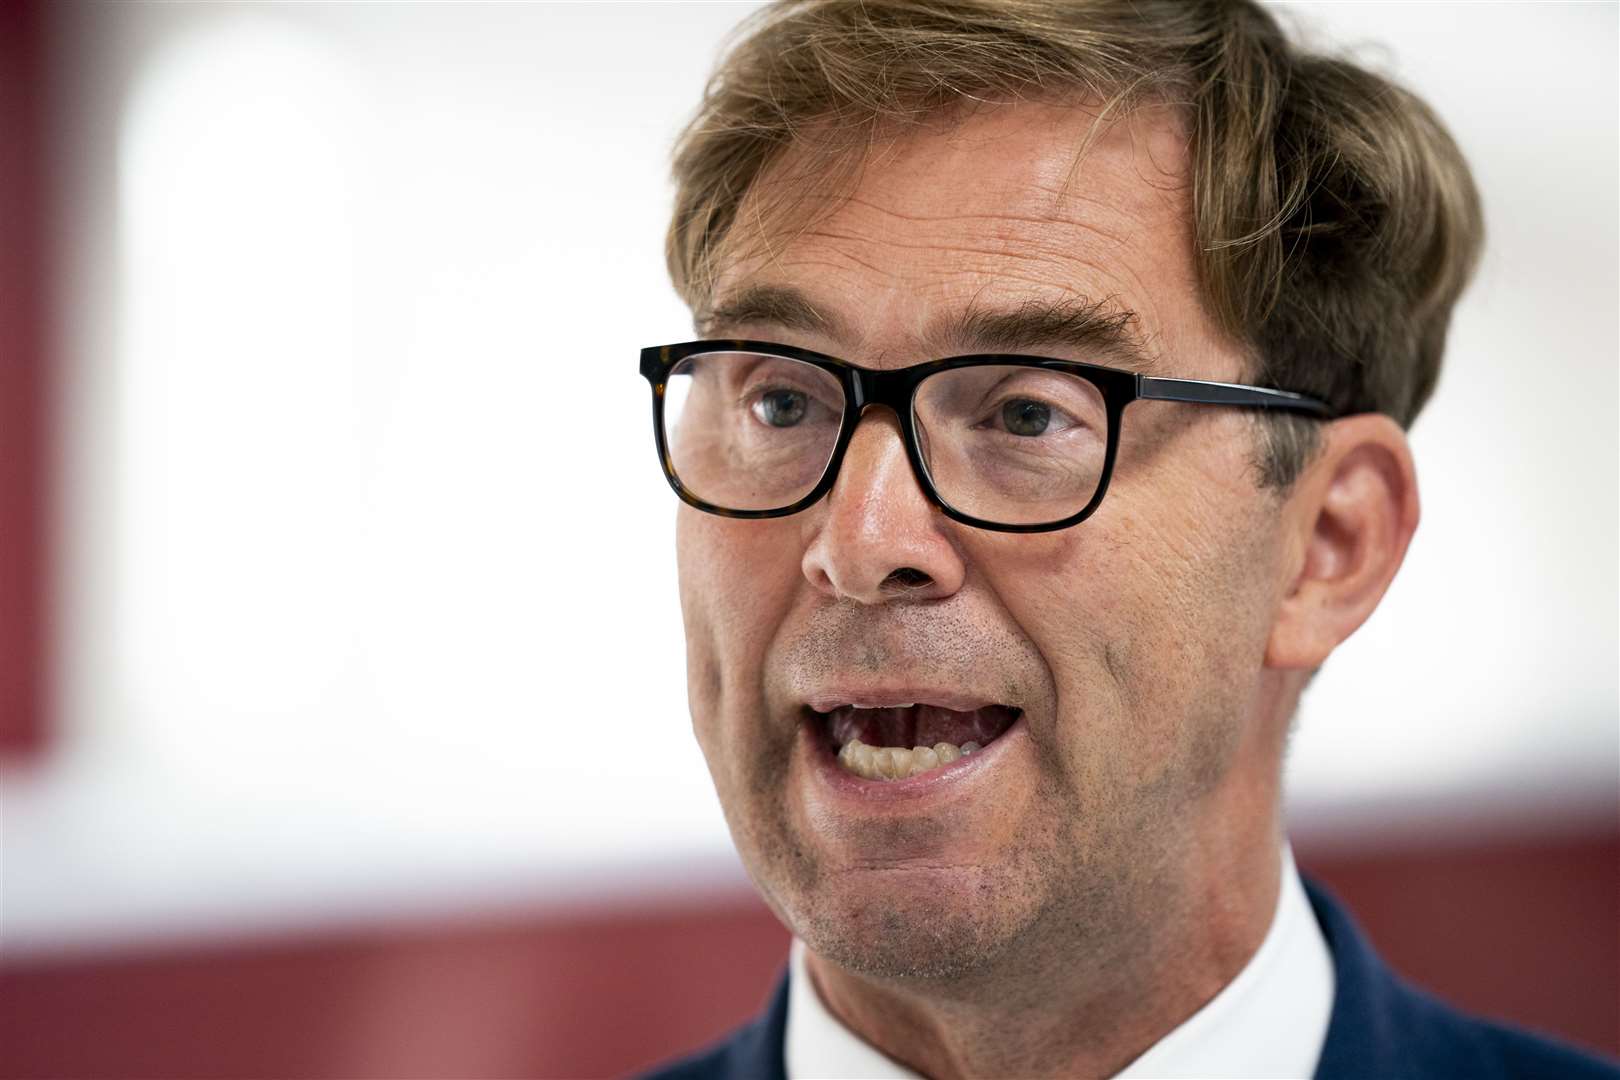 Commons Defence Committee chairman Tobias Ellwood warned it is ‘potentially part of a wider, long-term, Chinese strategy to infiltrate Parliament’ (Jordan Pettitt/PA)